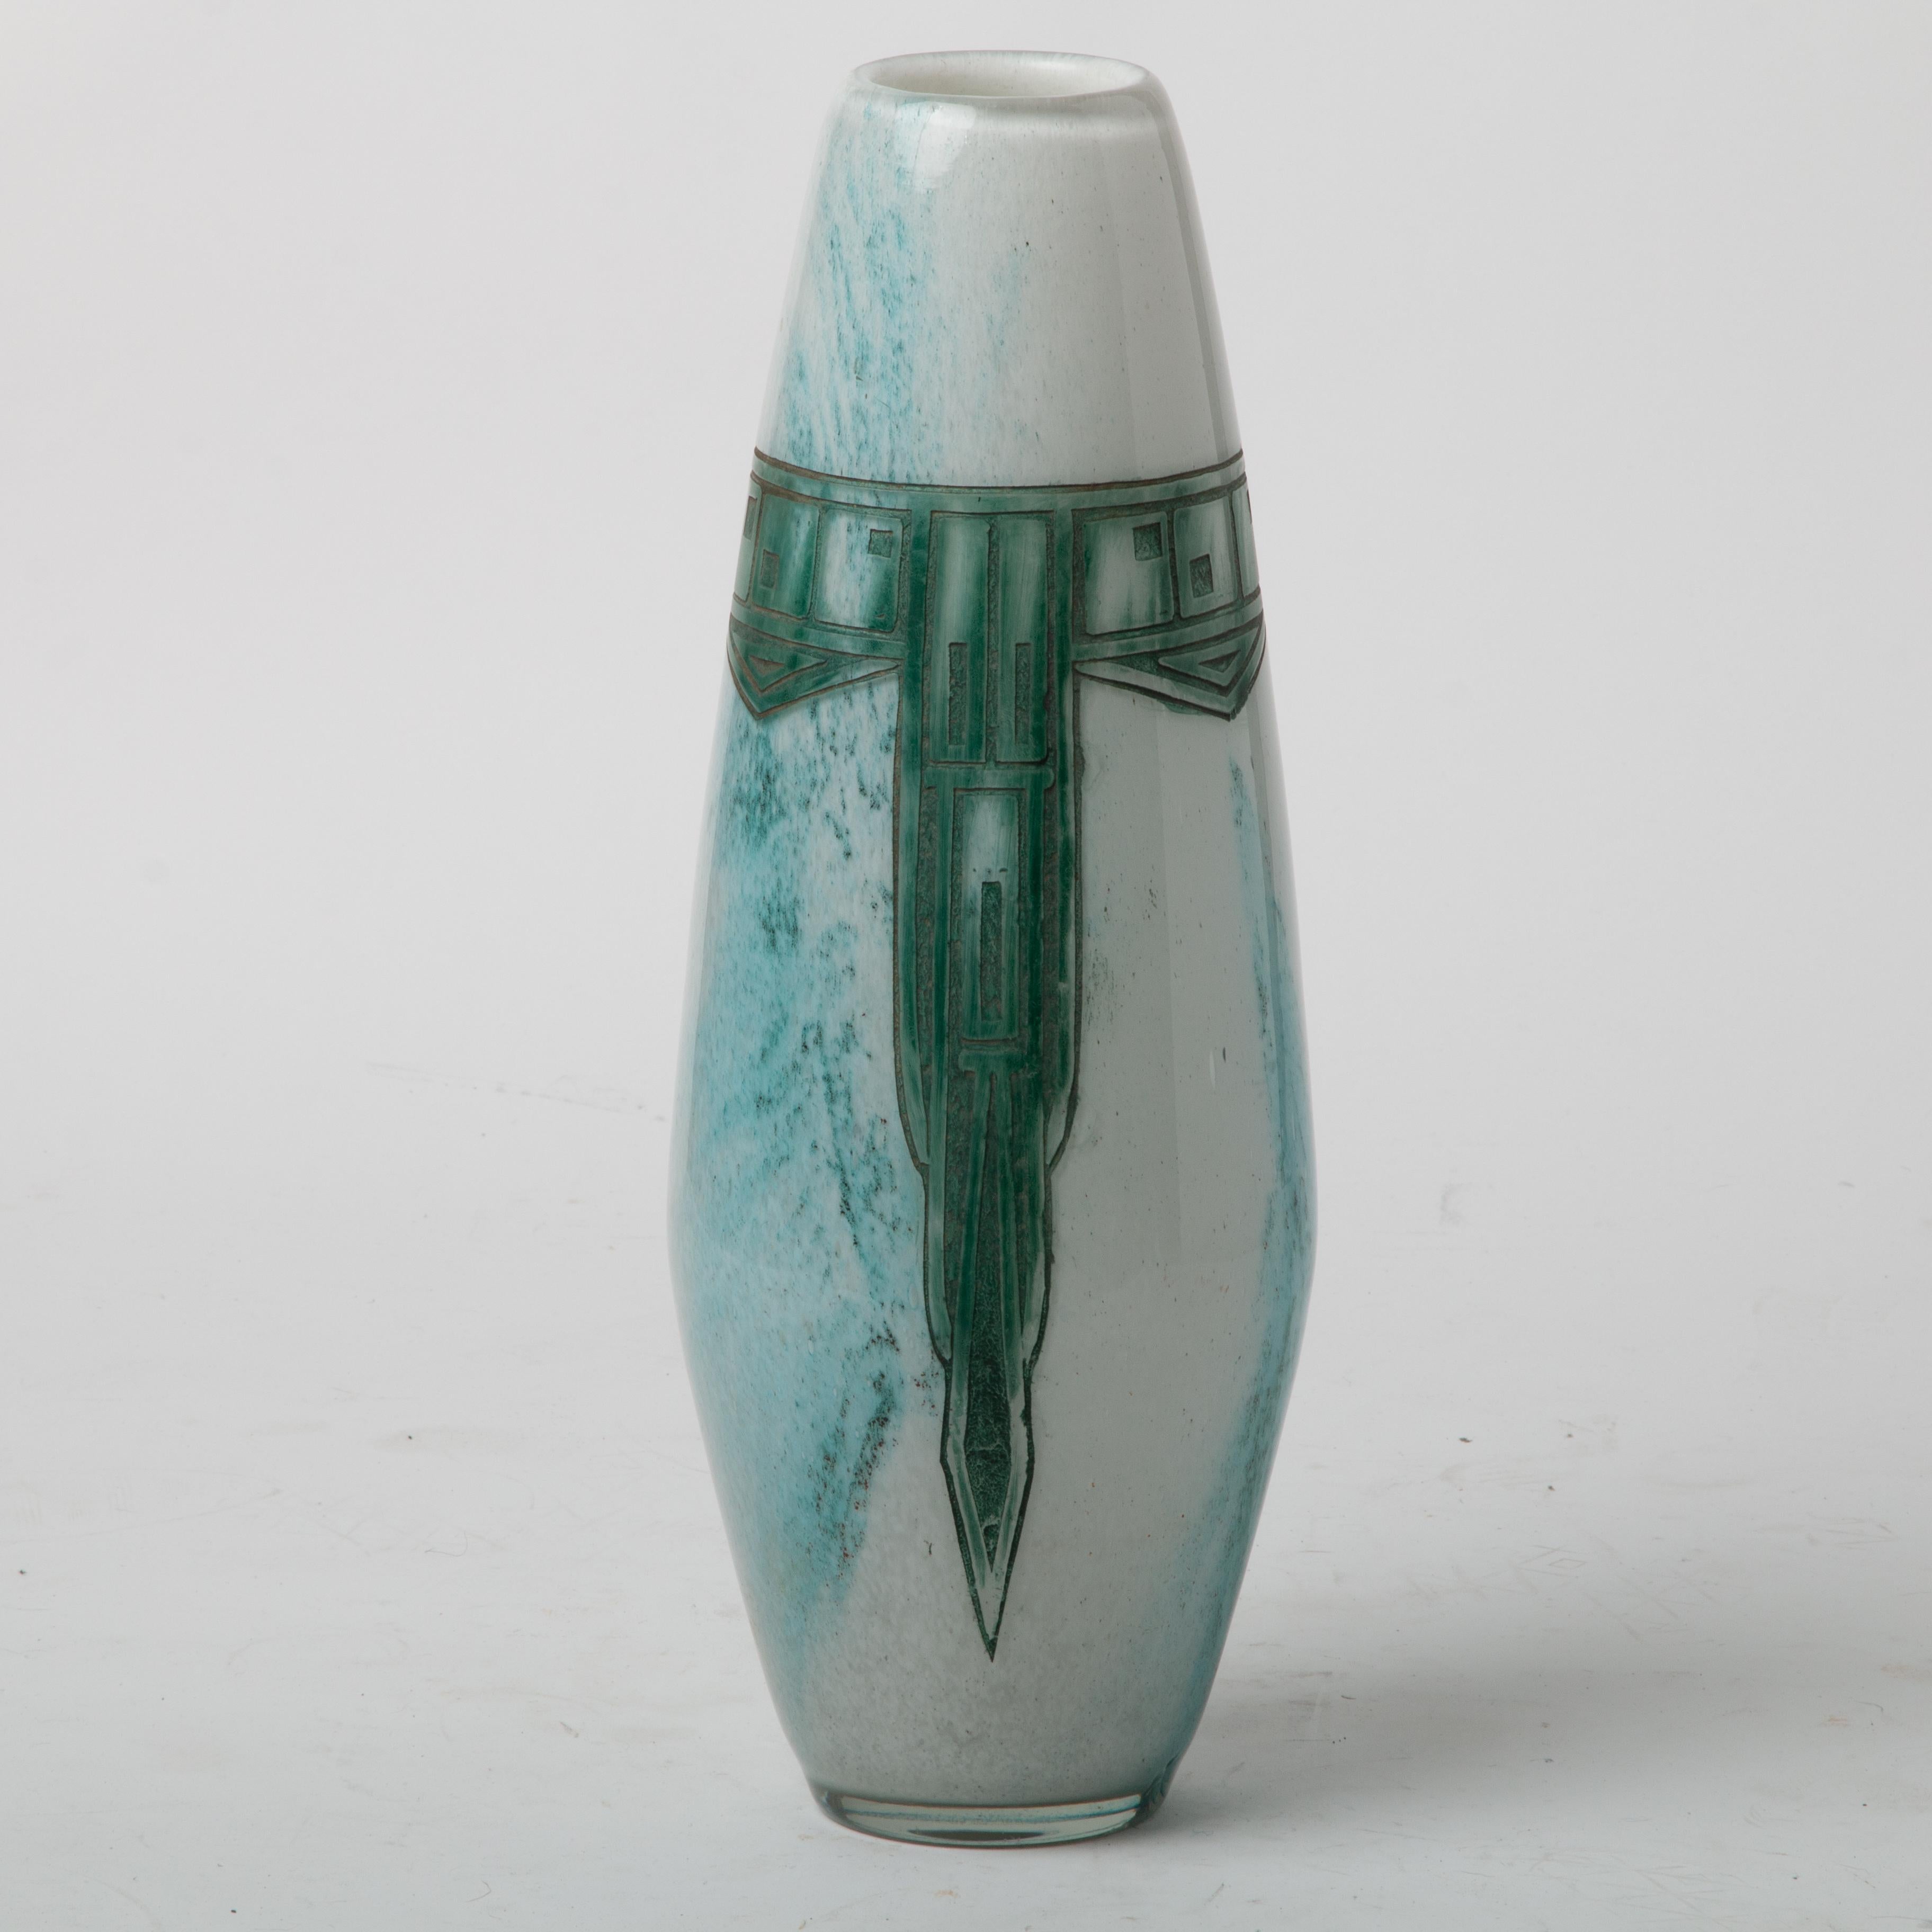 LeGras tall French art glass vase, Art Deco to mid 20th century period, hand blown vase with enamel and etched glass geometric design, signed 